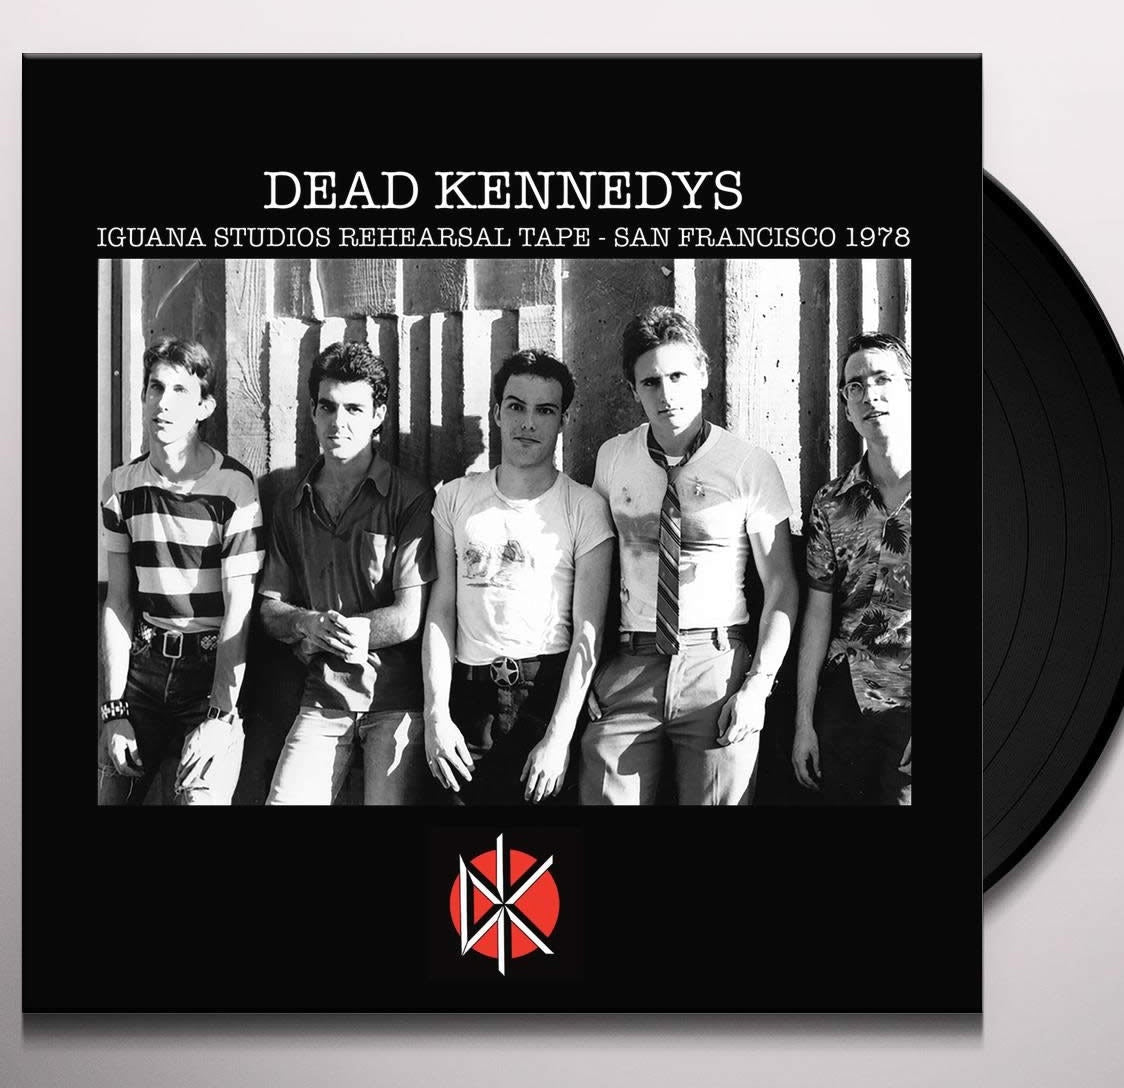 NEW - Dead Kennedys, Iguana Studios Rehearsal Sessions LP